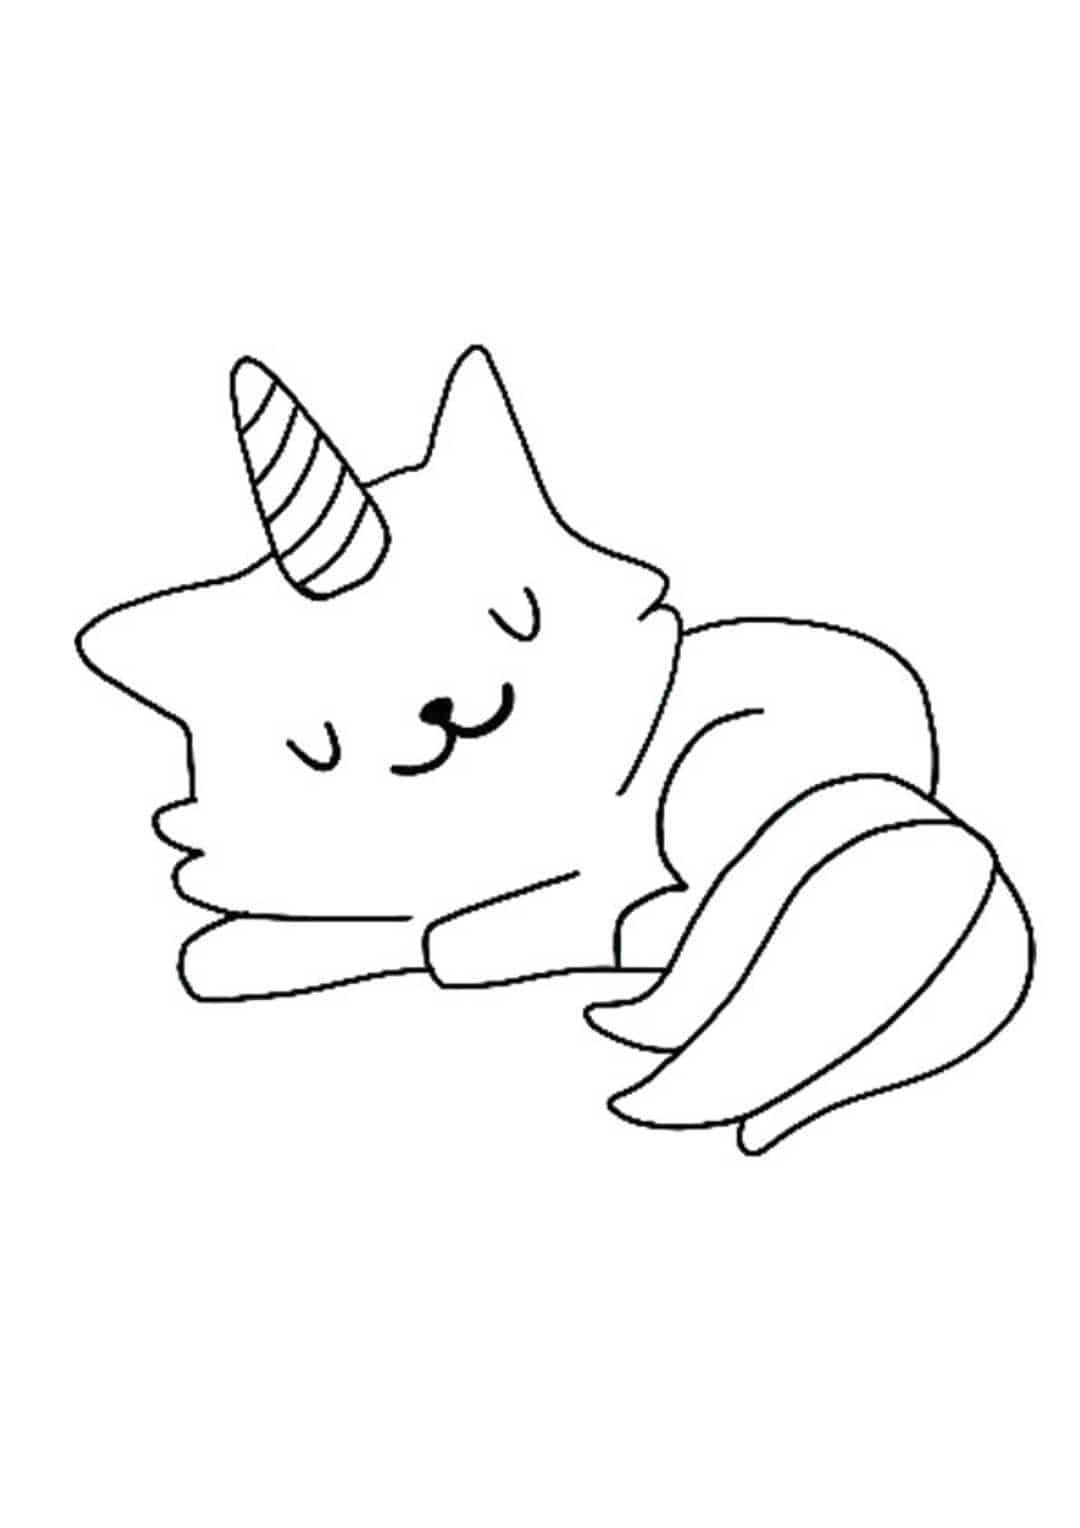 unicorn-cat-coloring-pages-printable-for-free-download